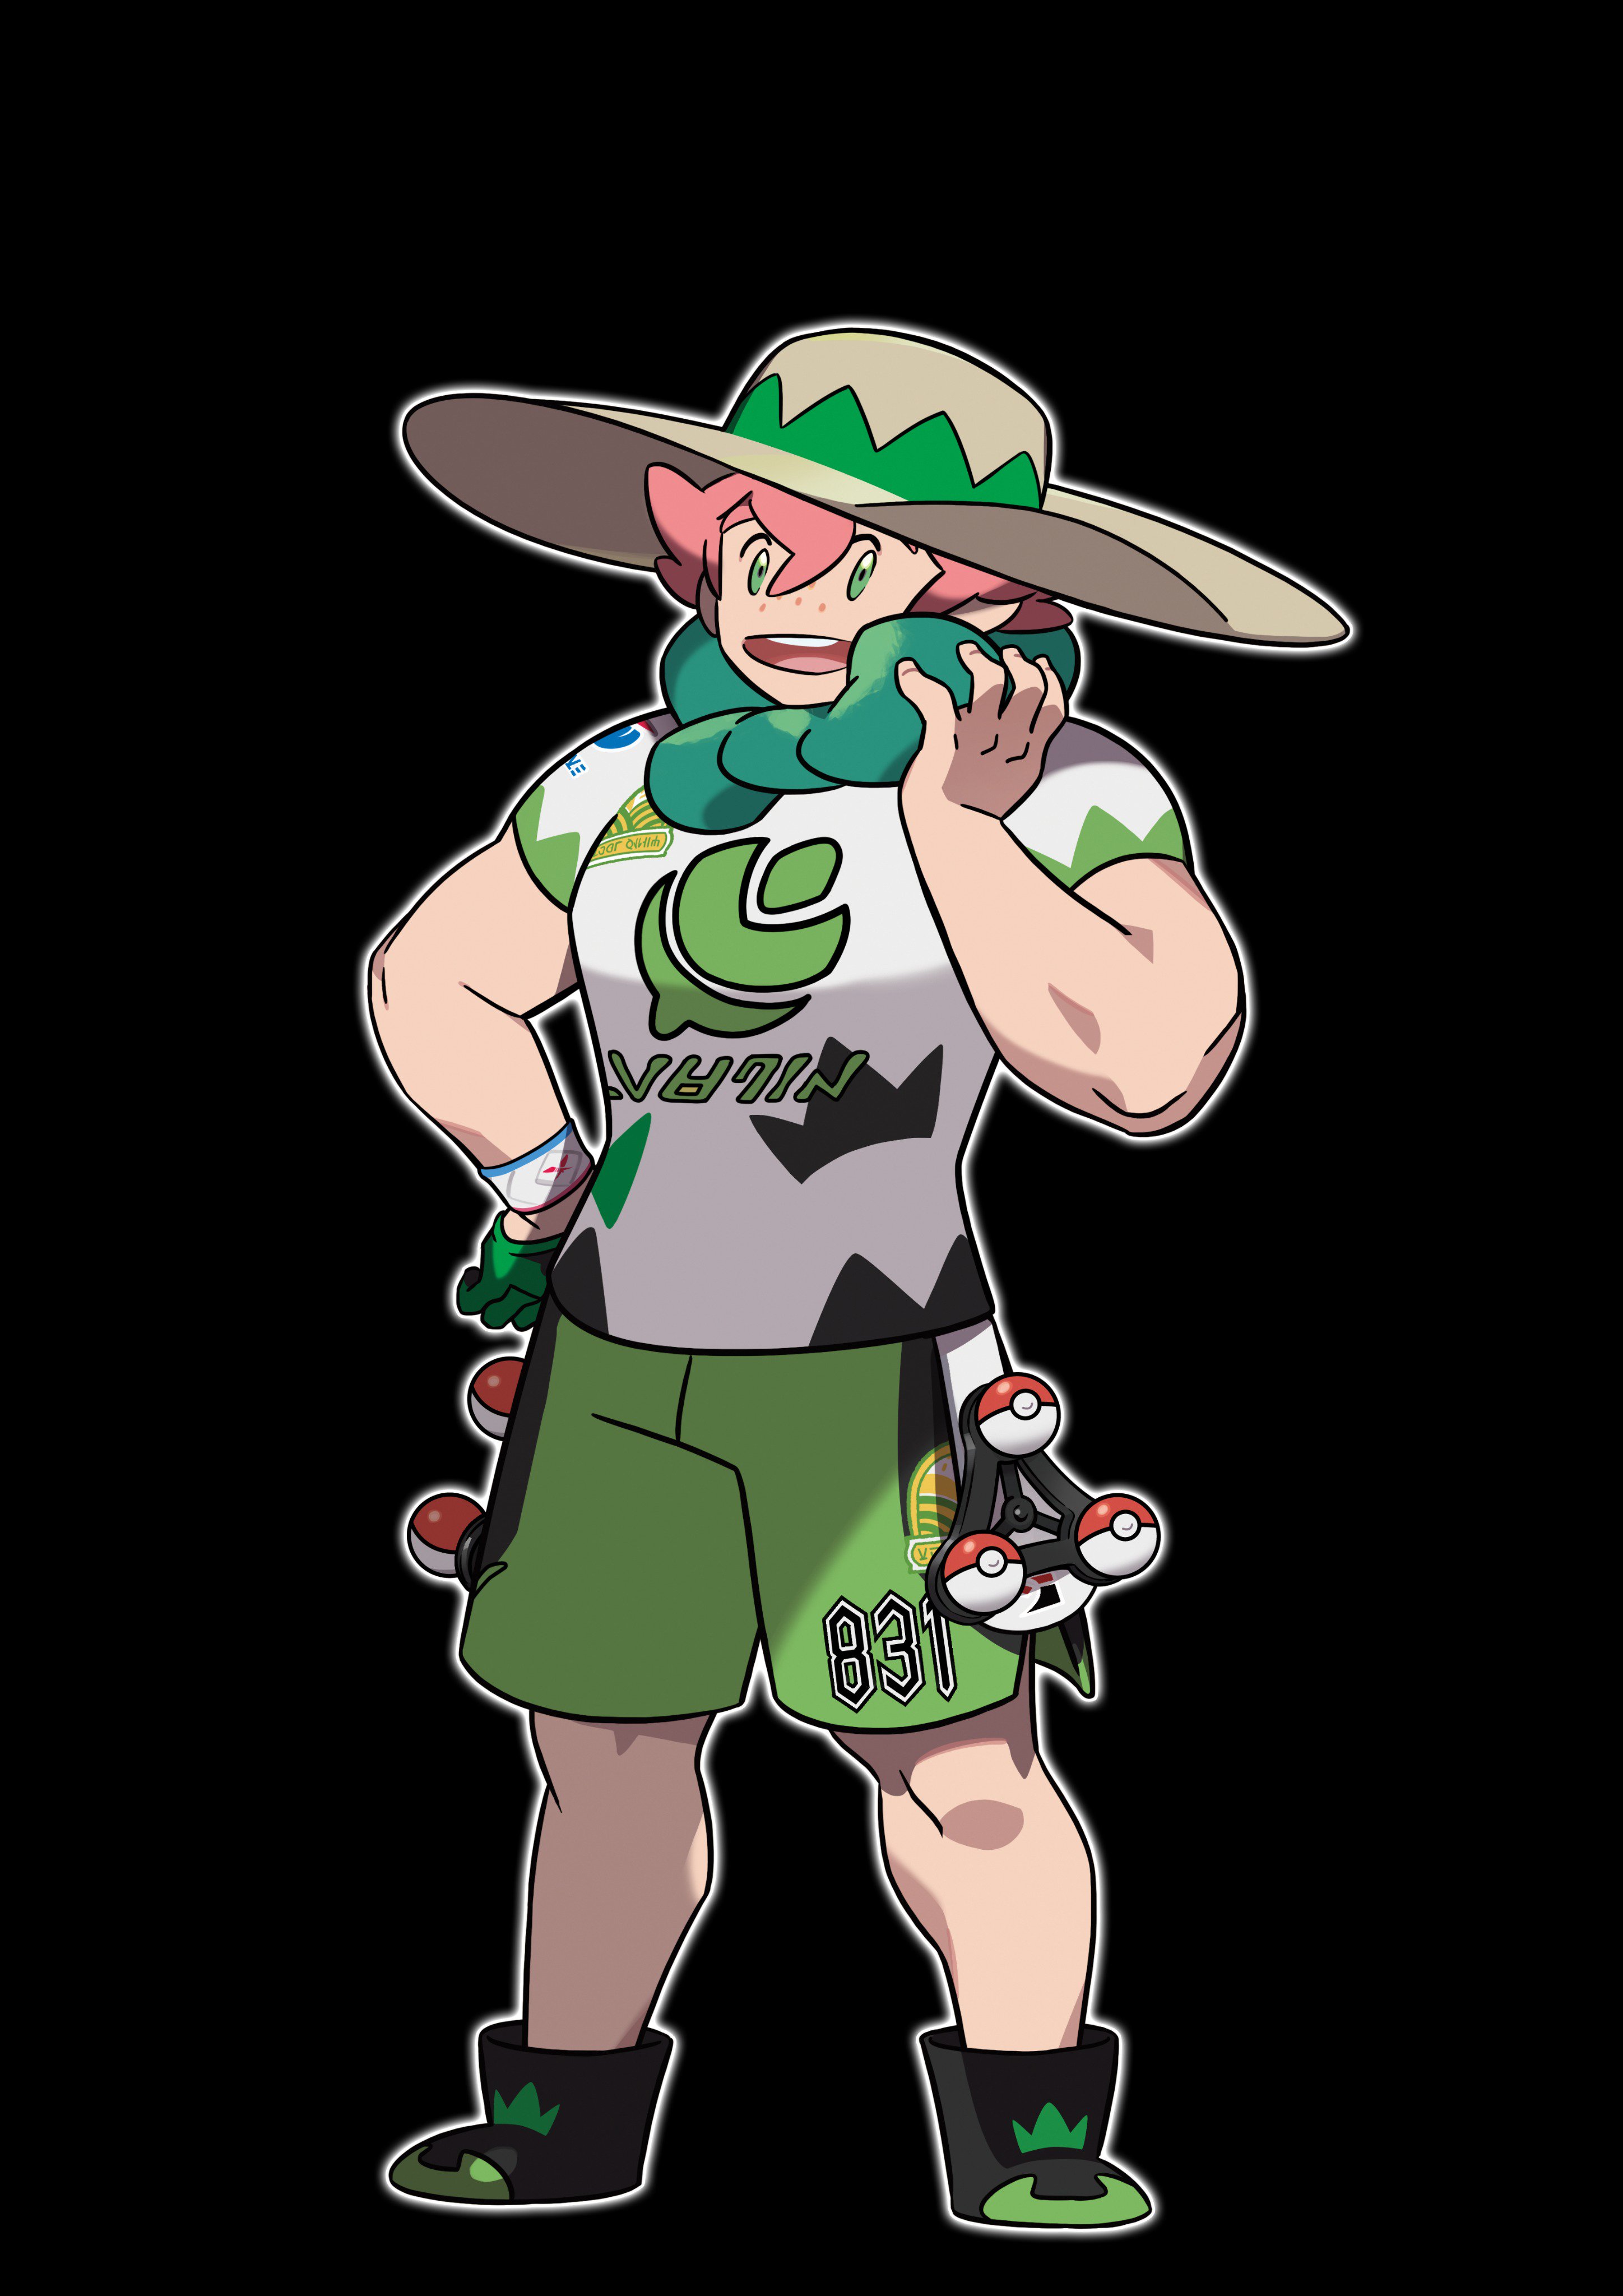 PLDH on X: Meet Pokémon Sword and Shield's Milo, the Grass Gym Leader. He  is well liked by the Trainers of his Gym. His credo is to always enjoy  battles and he